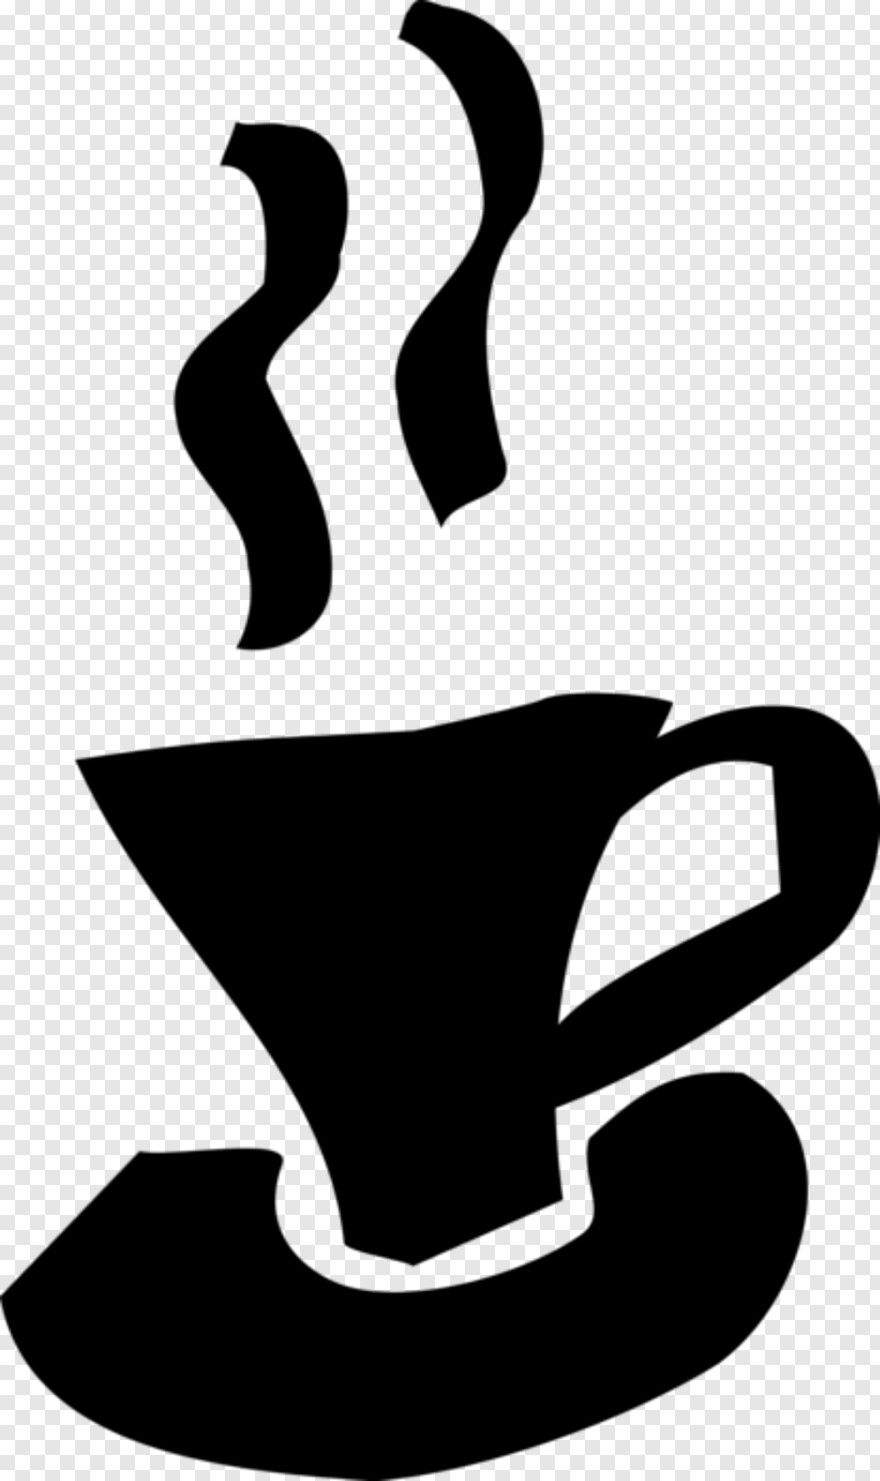 coffee-cup-vector # 368442